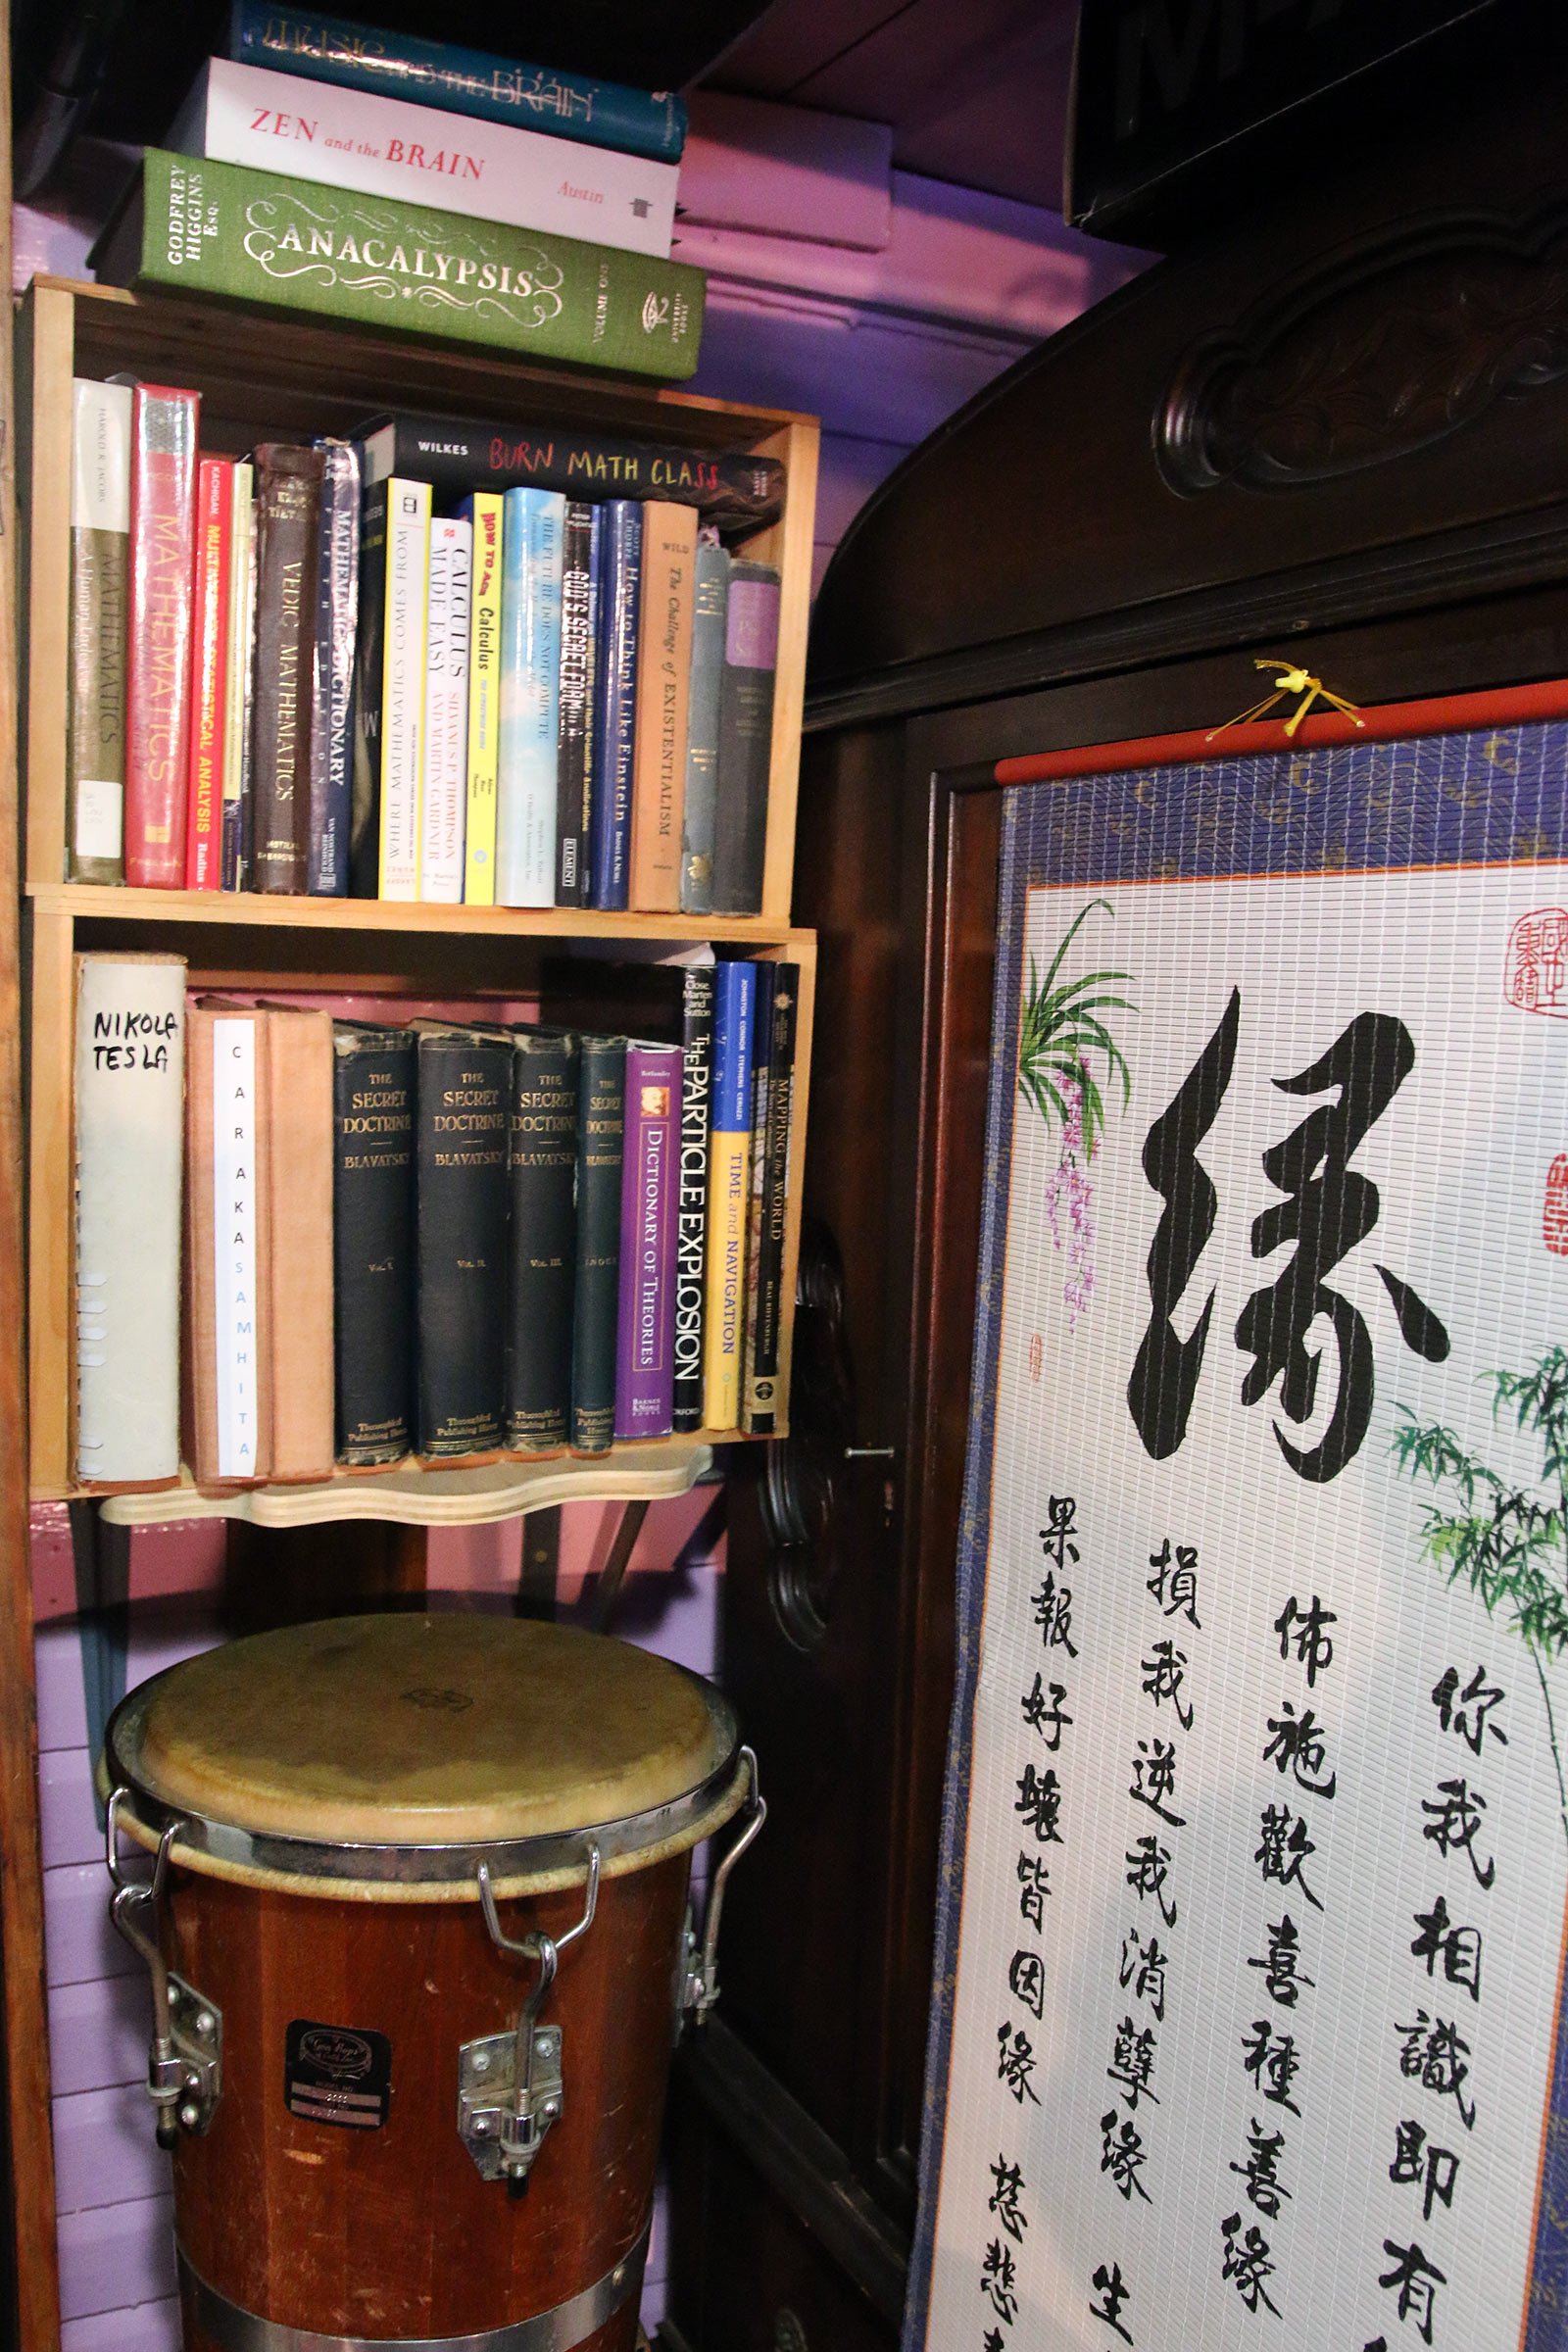 One of Milford Graves's drums on a shelf in a bookcase underneath two rows of books which is next to a Japanese scroll.